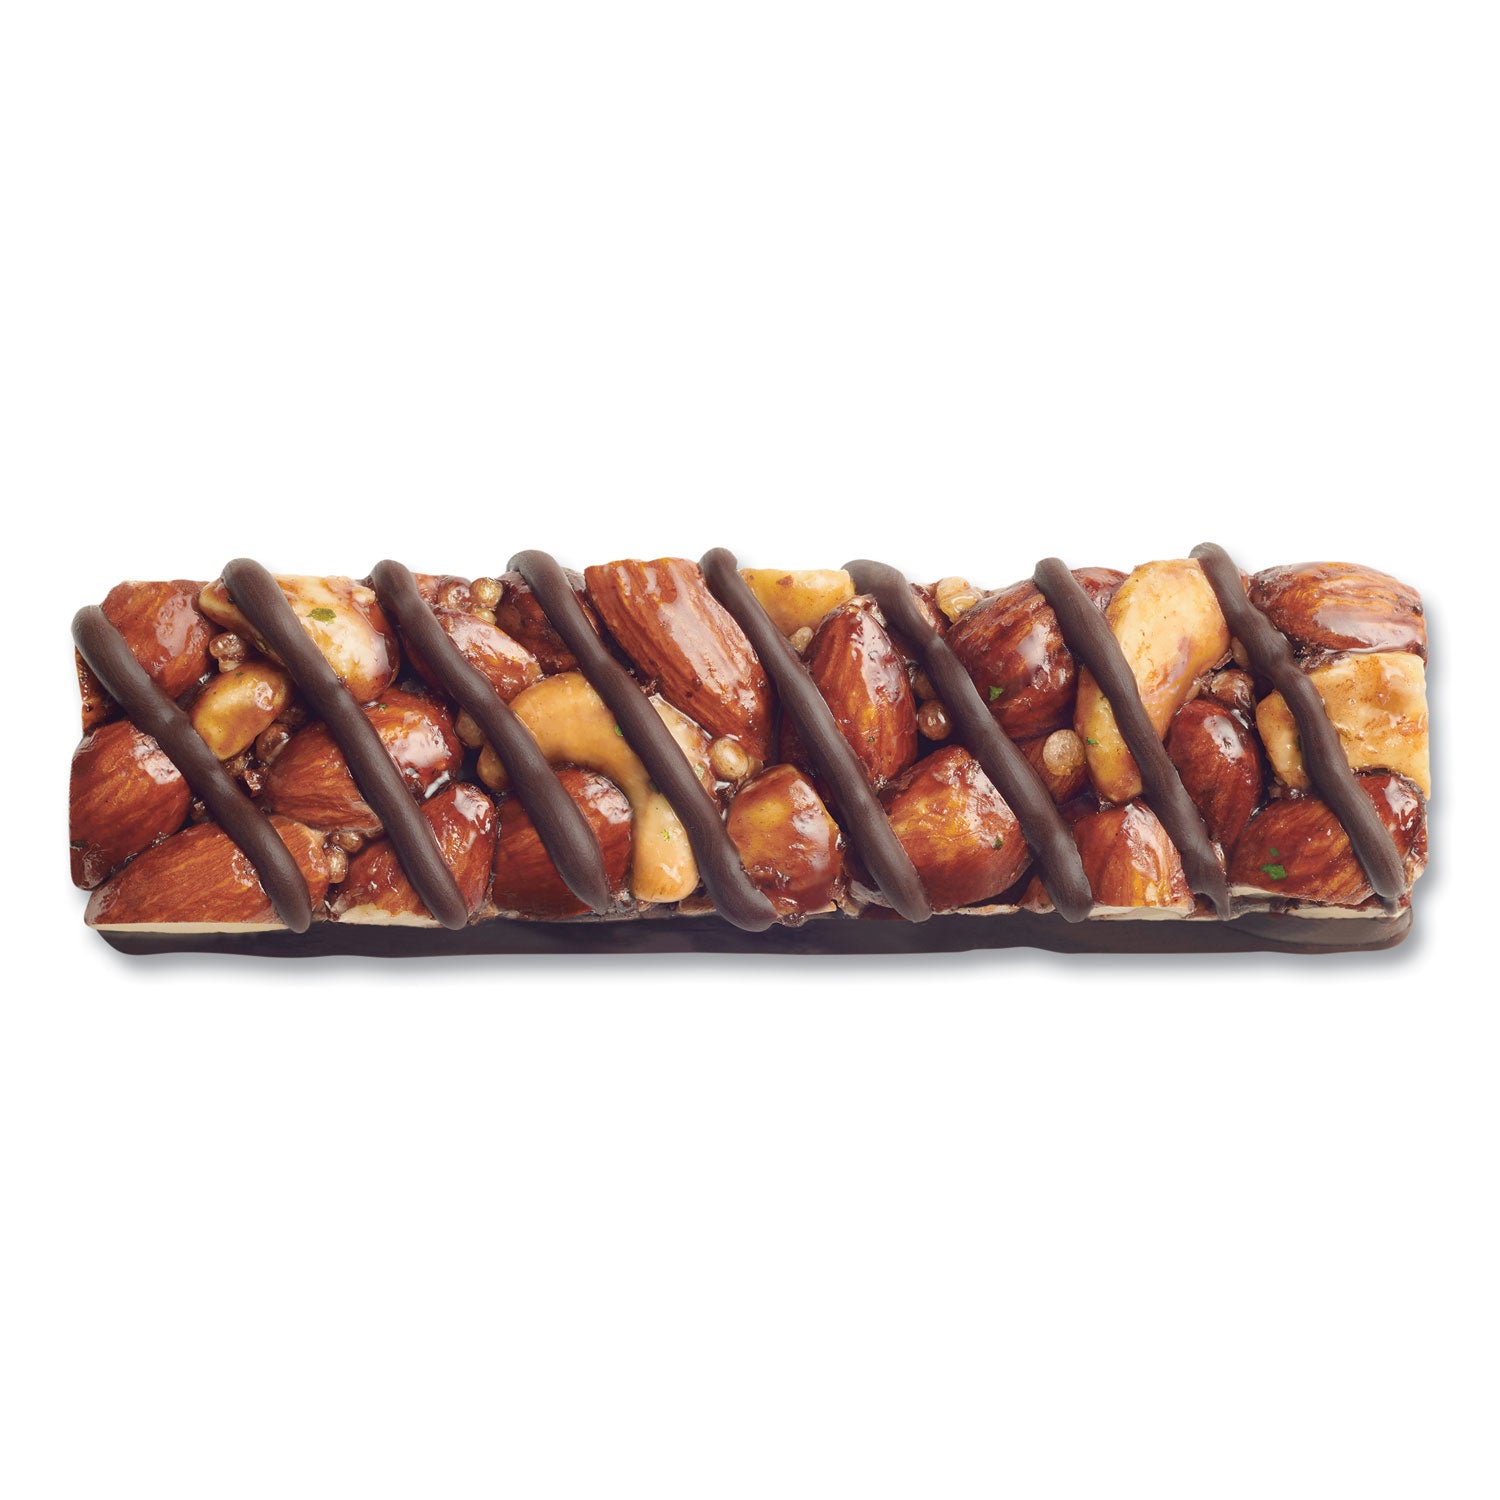 nuts-and-spices-bar-dark-chocolate-almond-mint-14-oz-bar-12-box_knd19988 - 4